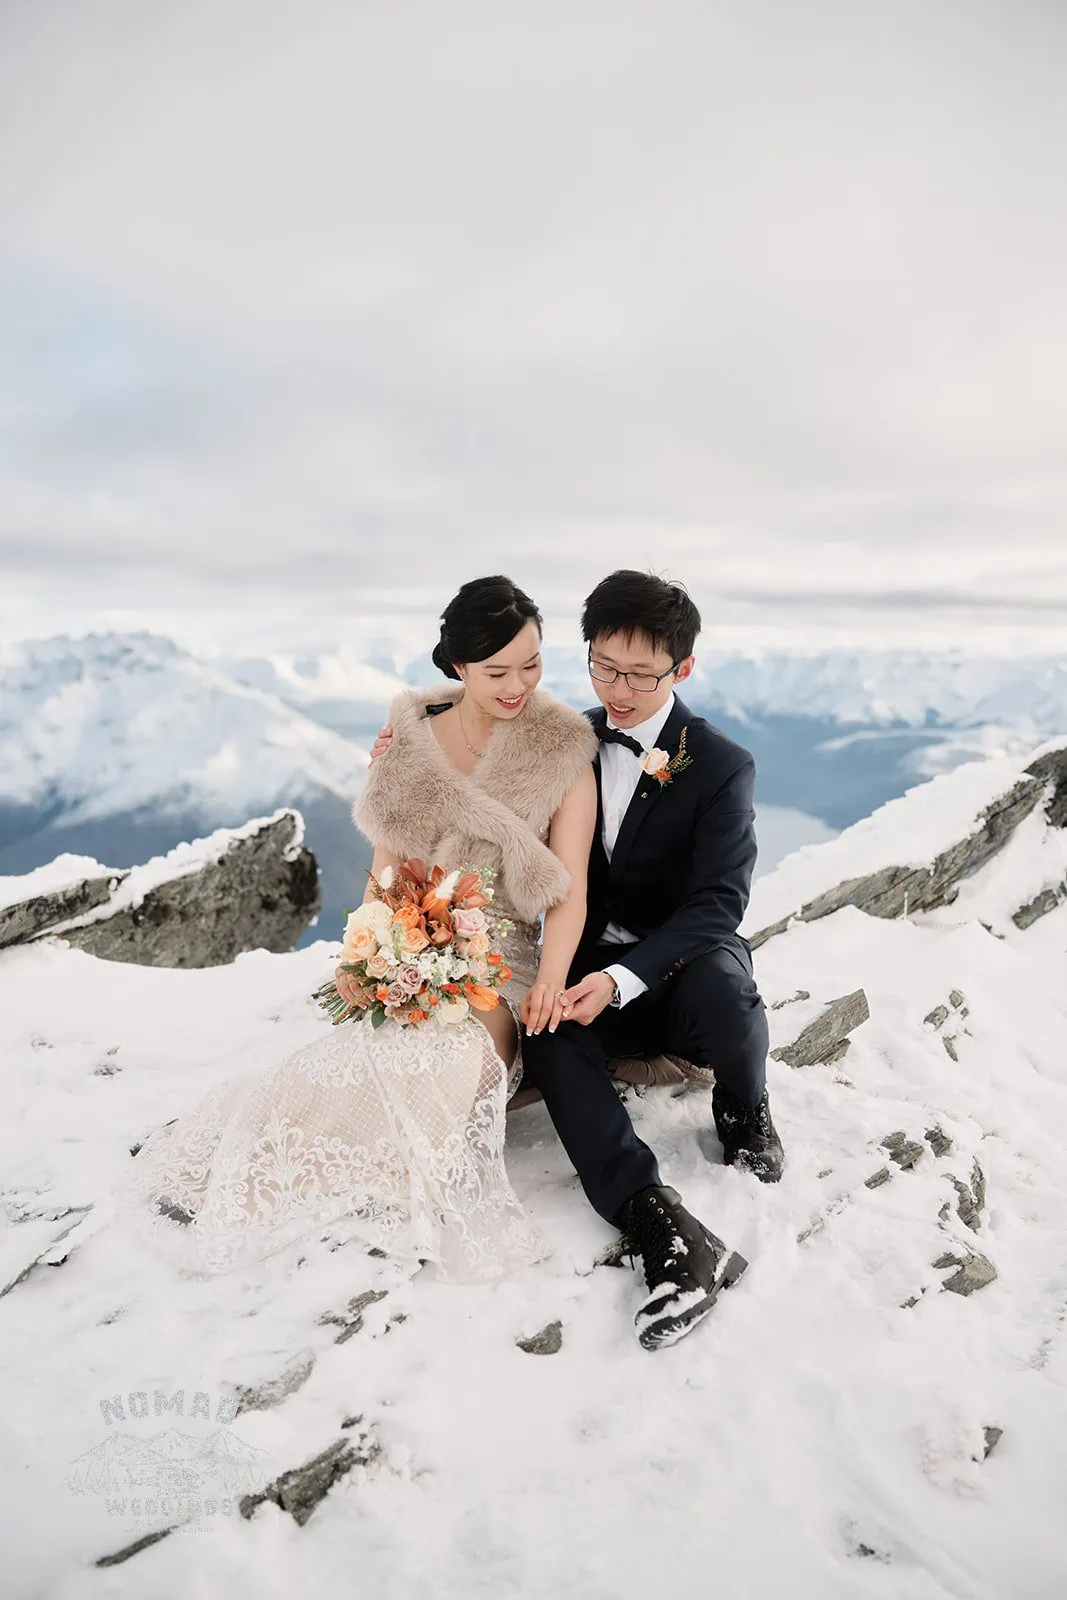 Joanna and Tony, a bride and groom, taking their pre-wedding shoot on top of a snow covered mountain in Queenstown, New Zealand.